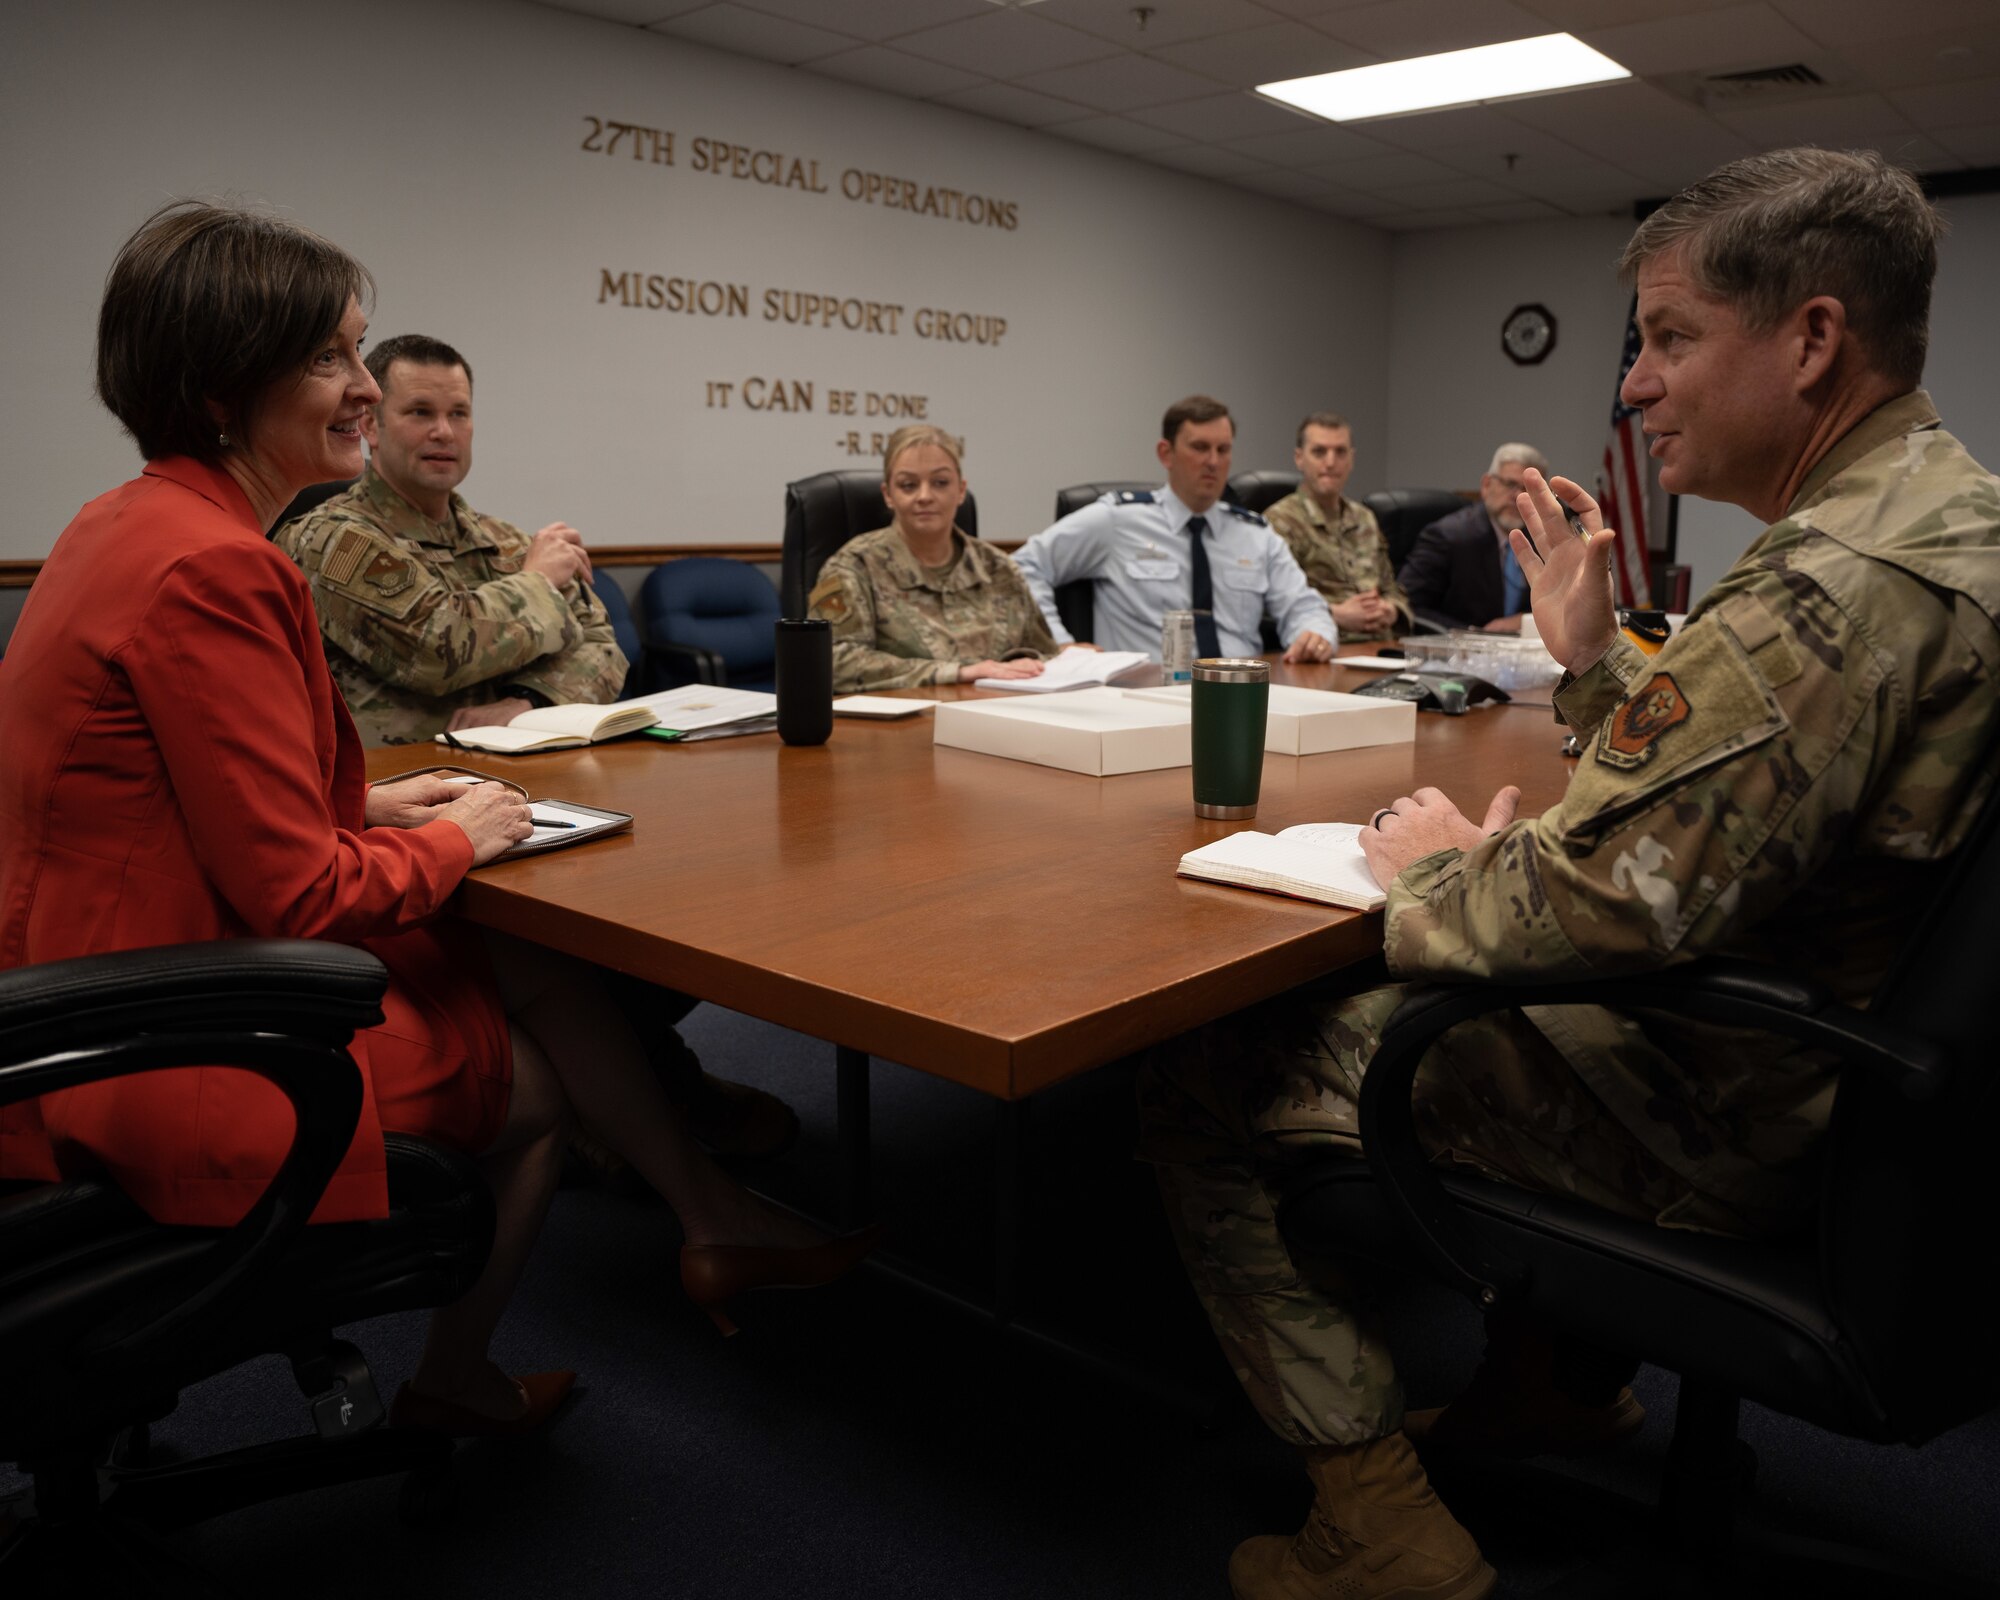 The 27th Special Operations Mission Support Group leadership meets with Susan Veazey, Regional Director of the Department of Defense’s Office of Local Defense Community Cooperation, during a meeting with the 27 SOMSG Leadership at Cannon Air Force Base, N.M., April 24, 2024. OLDCC, in coordination with other federal agencies, delivers a program that enables states, local governments, and communities to increase military, civilian, and industrial readiness and resiliency, and support military families. (U.S. Air Force photo by Senior Airman Parra)